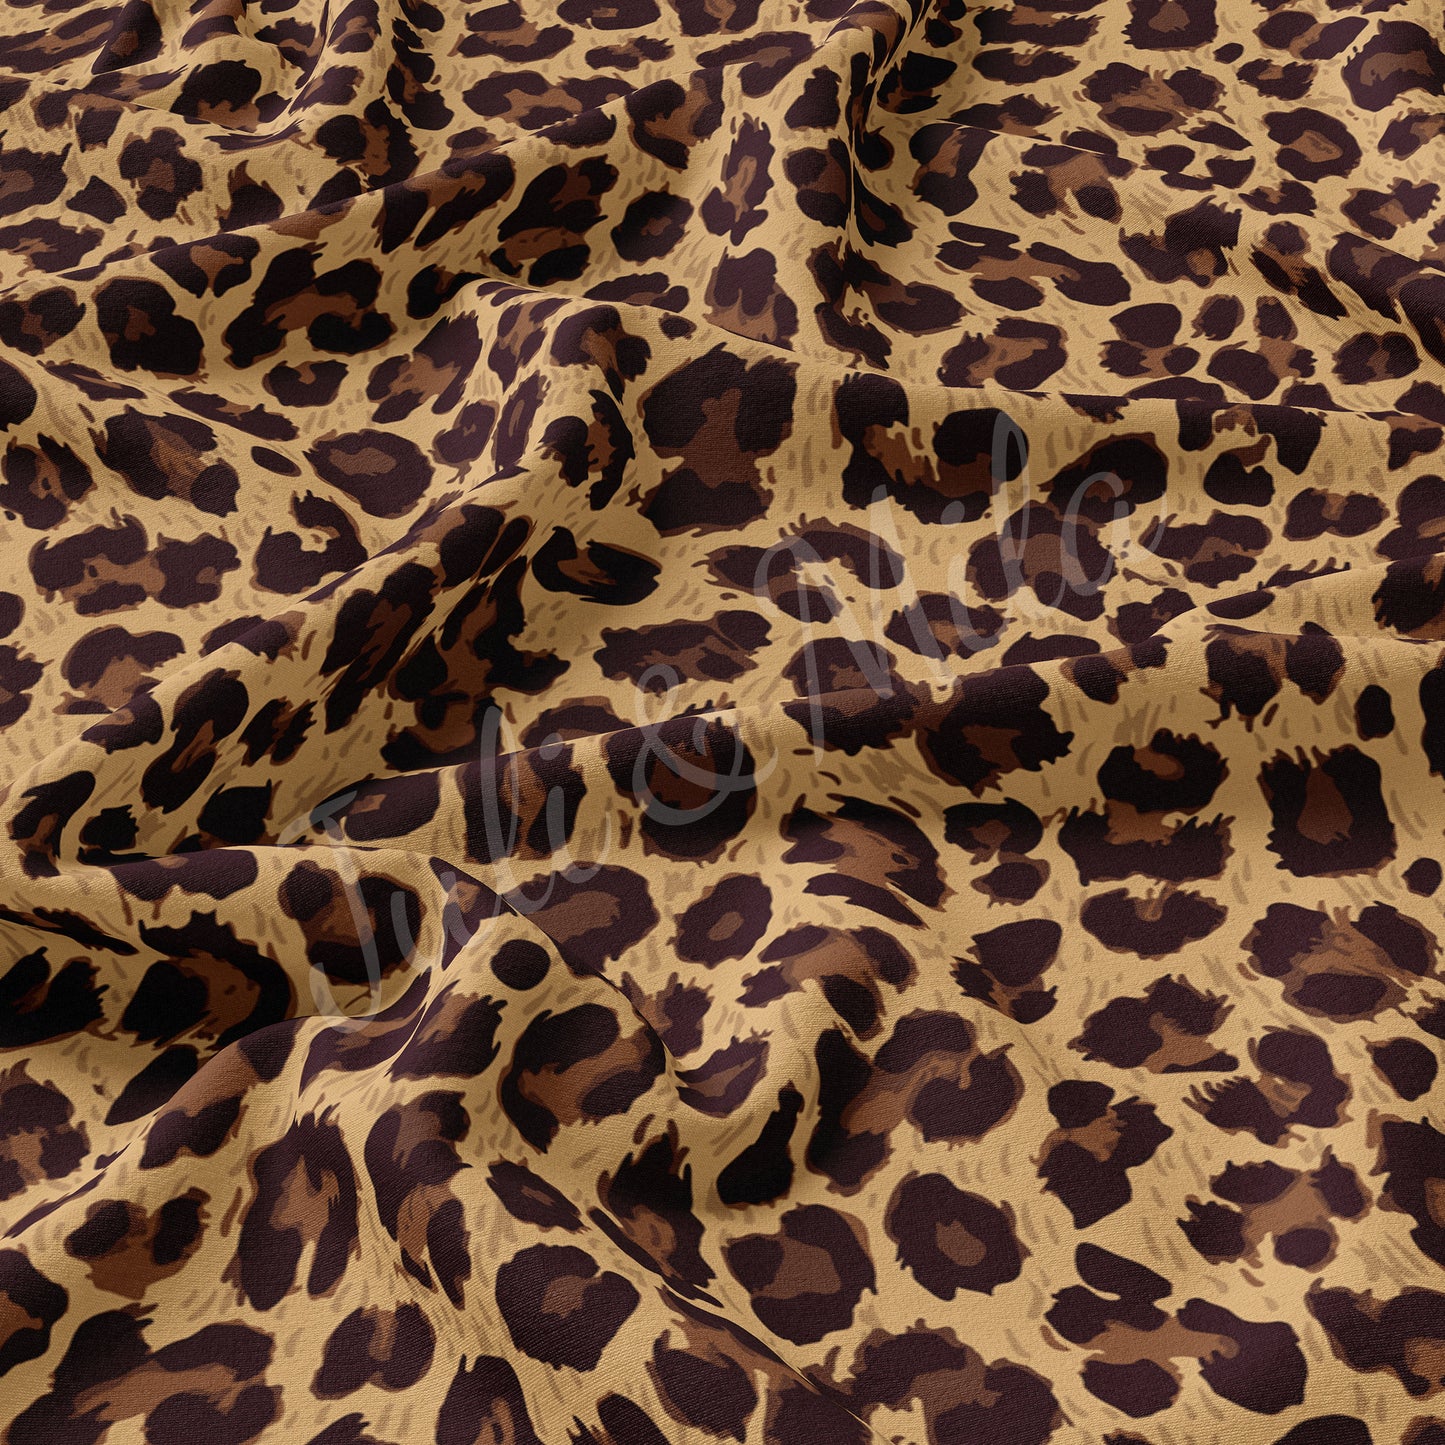 DBP Fabric Double Brushed Polyester Fabric Leopard